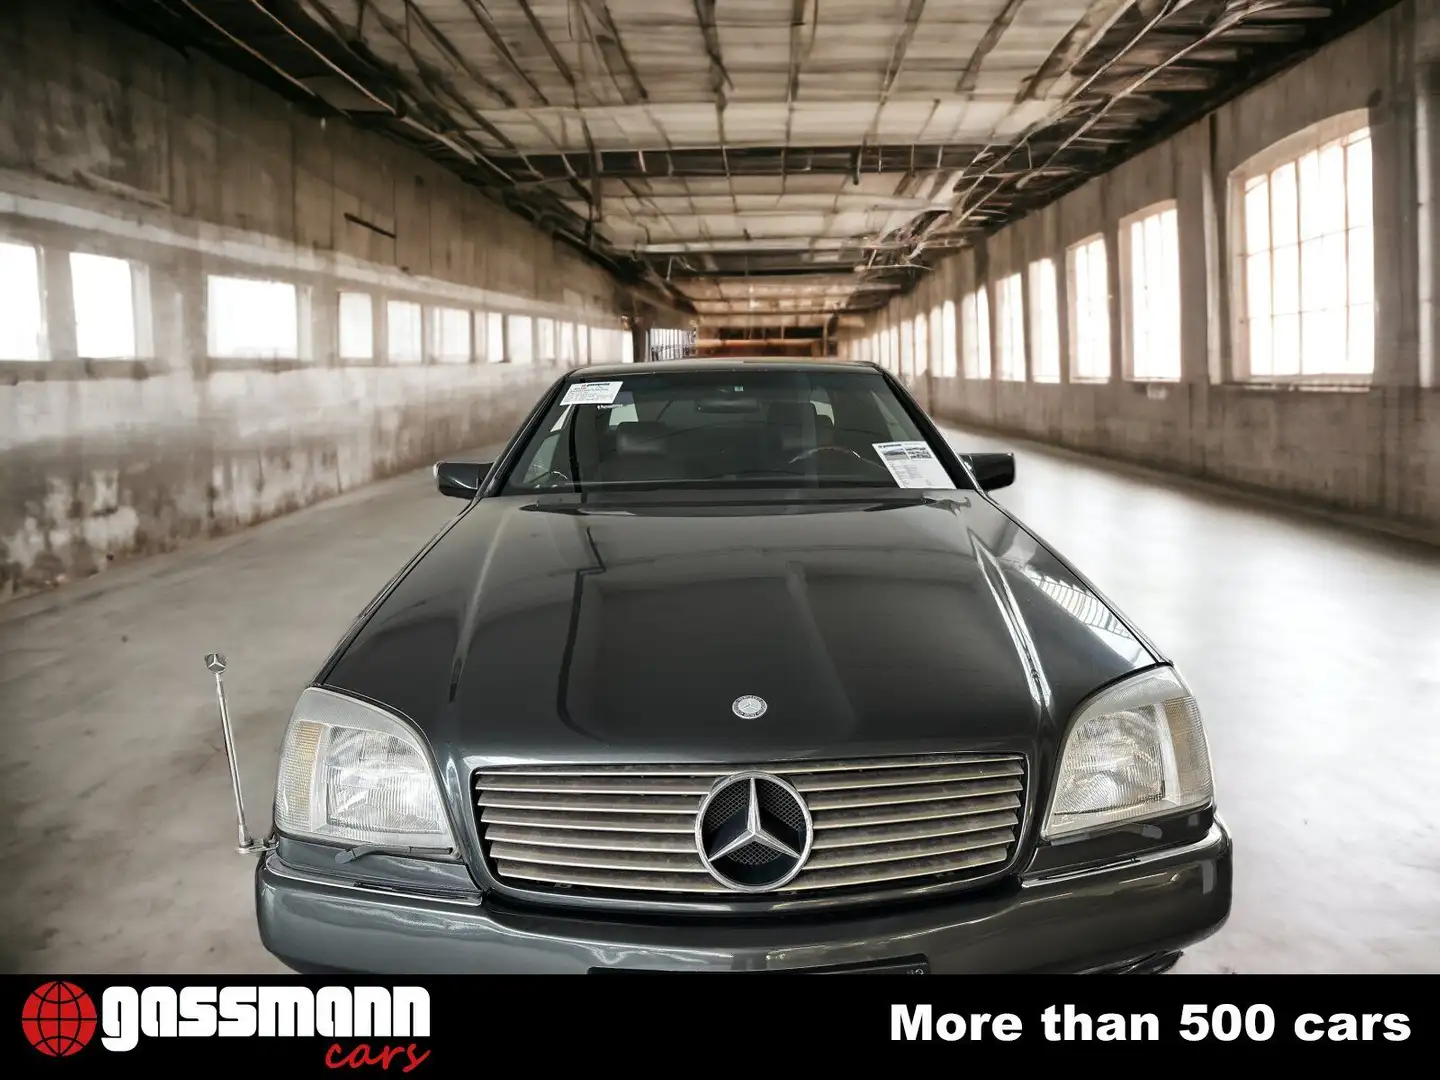 Mercedes-Benz S 600 Coupe / CL 600 Coupe / 600 SEC C140 Siyah - 2